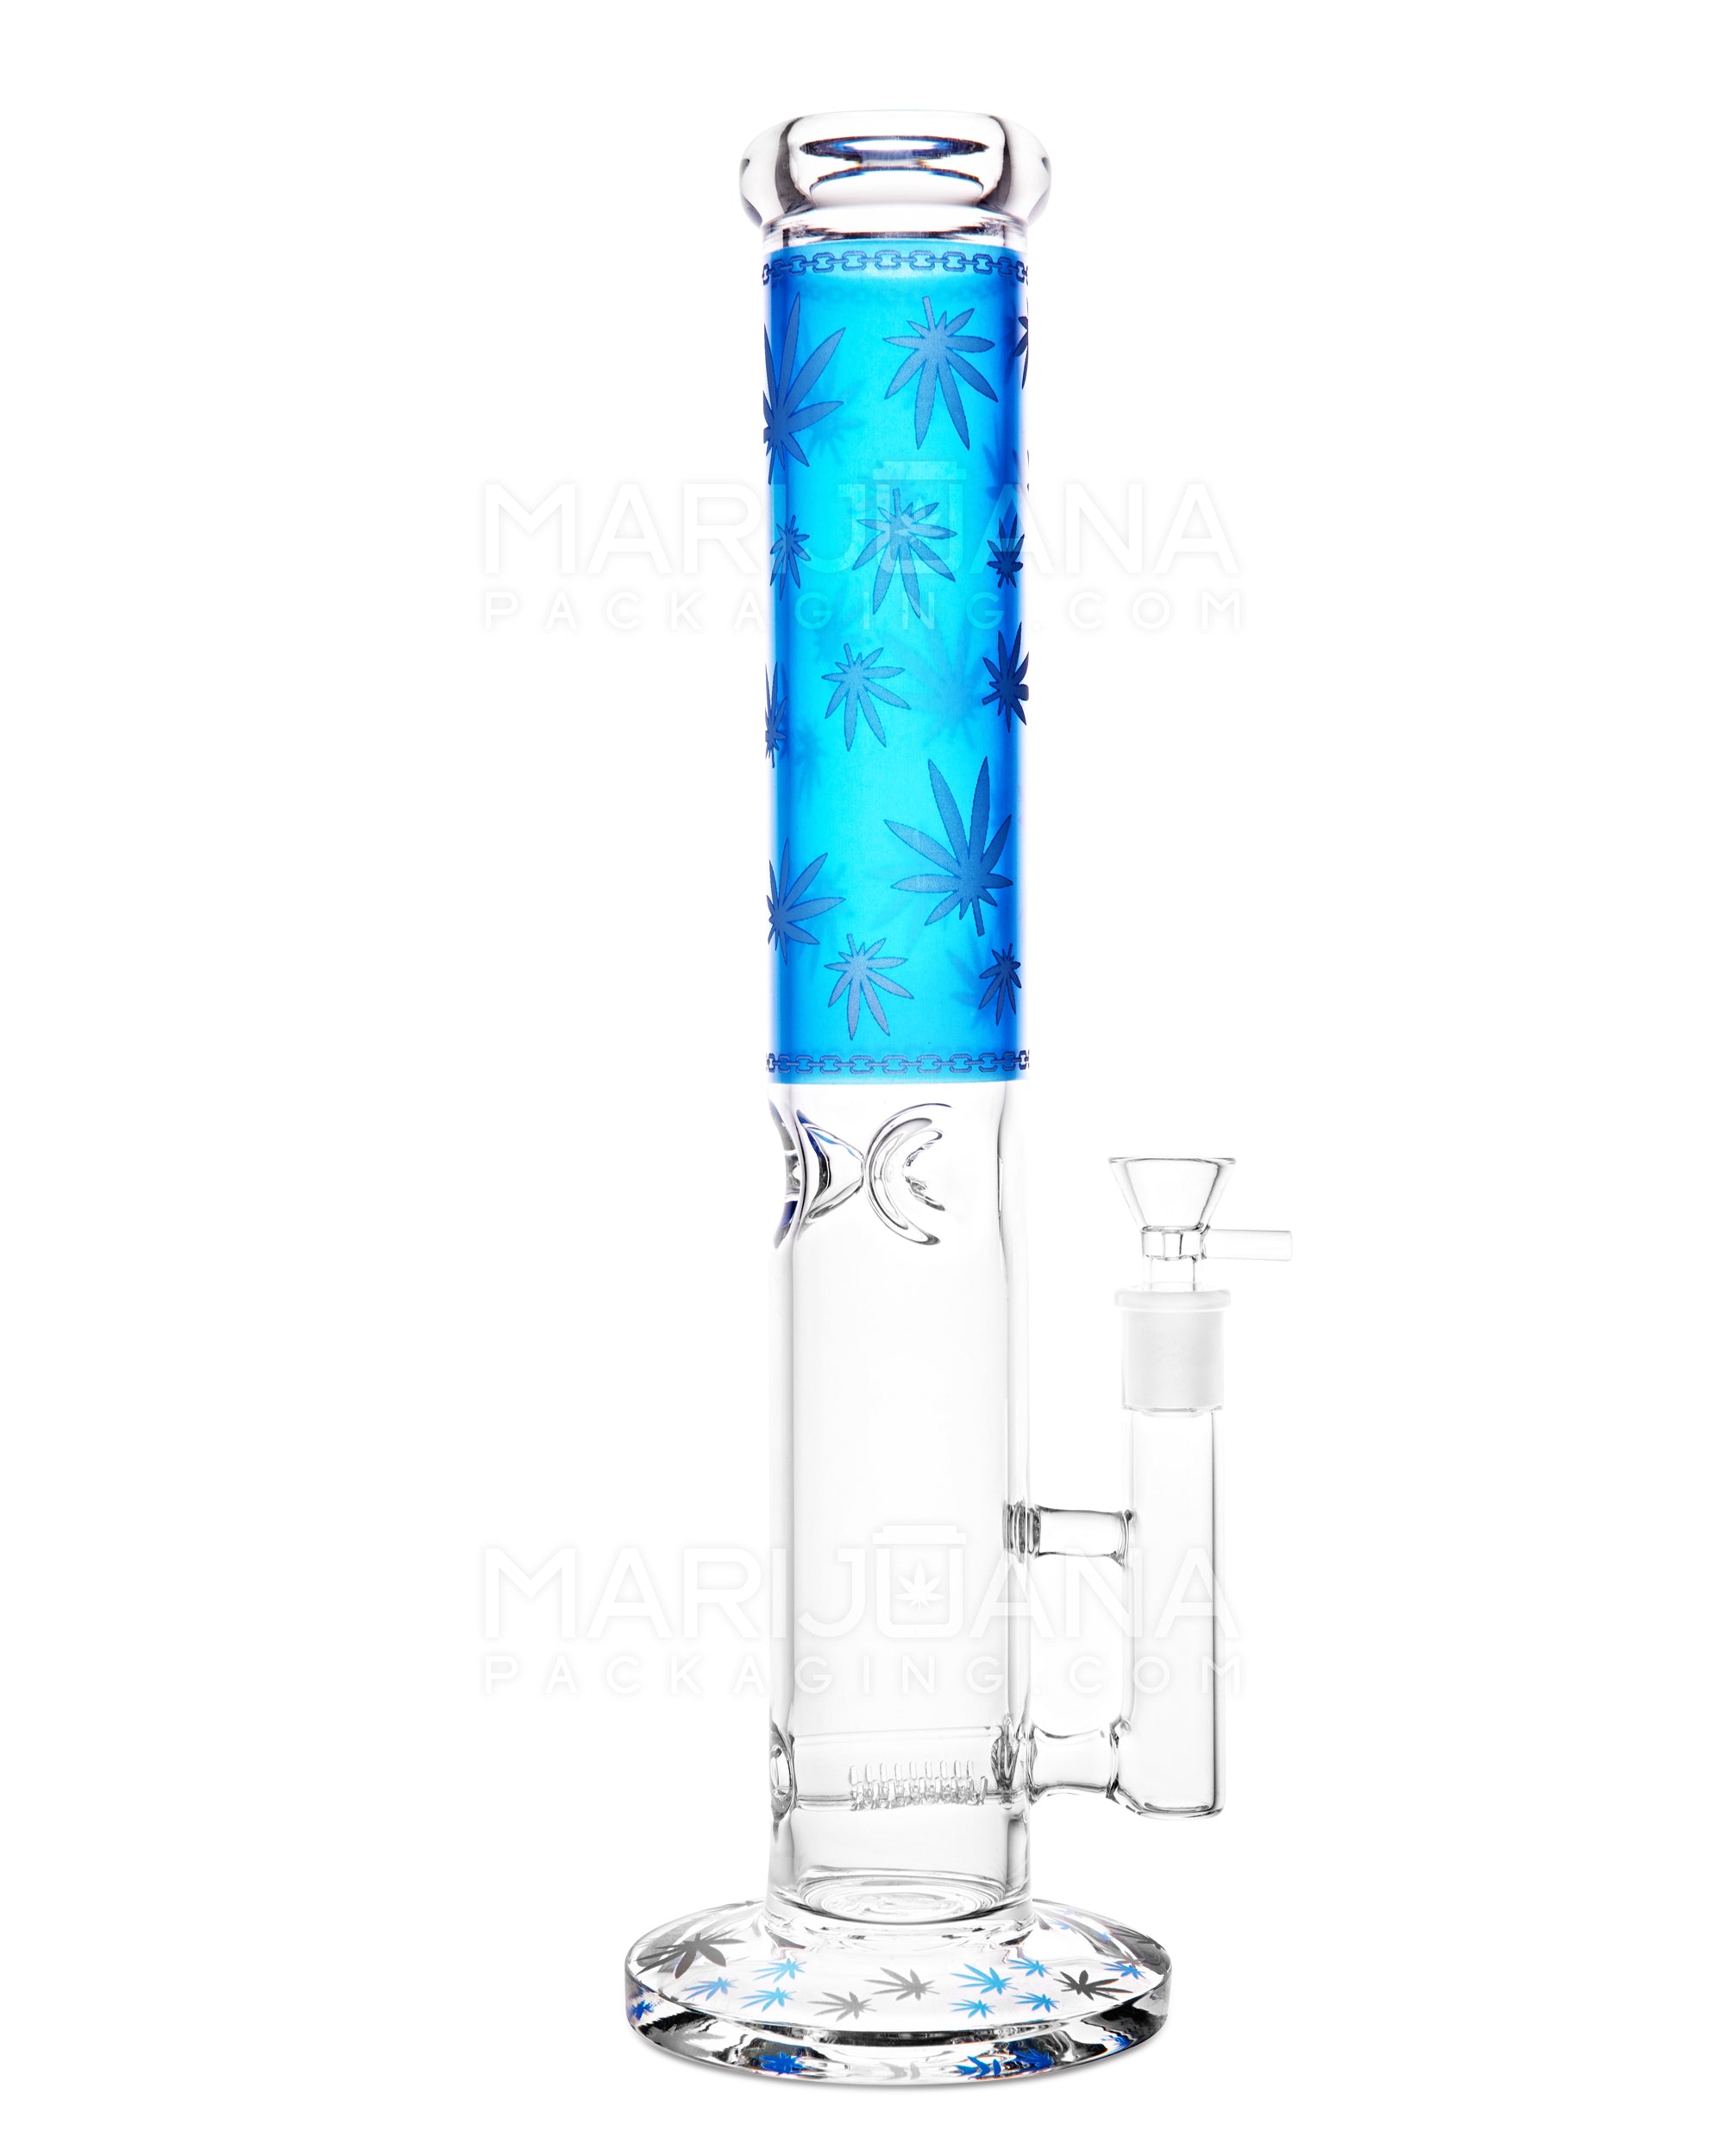 Straight Neck Leaf Decal Inline Perc Glass Water Pipe w/ Ice Catcher | 14in Tall - 14mm Bowl - Blue - 1